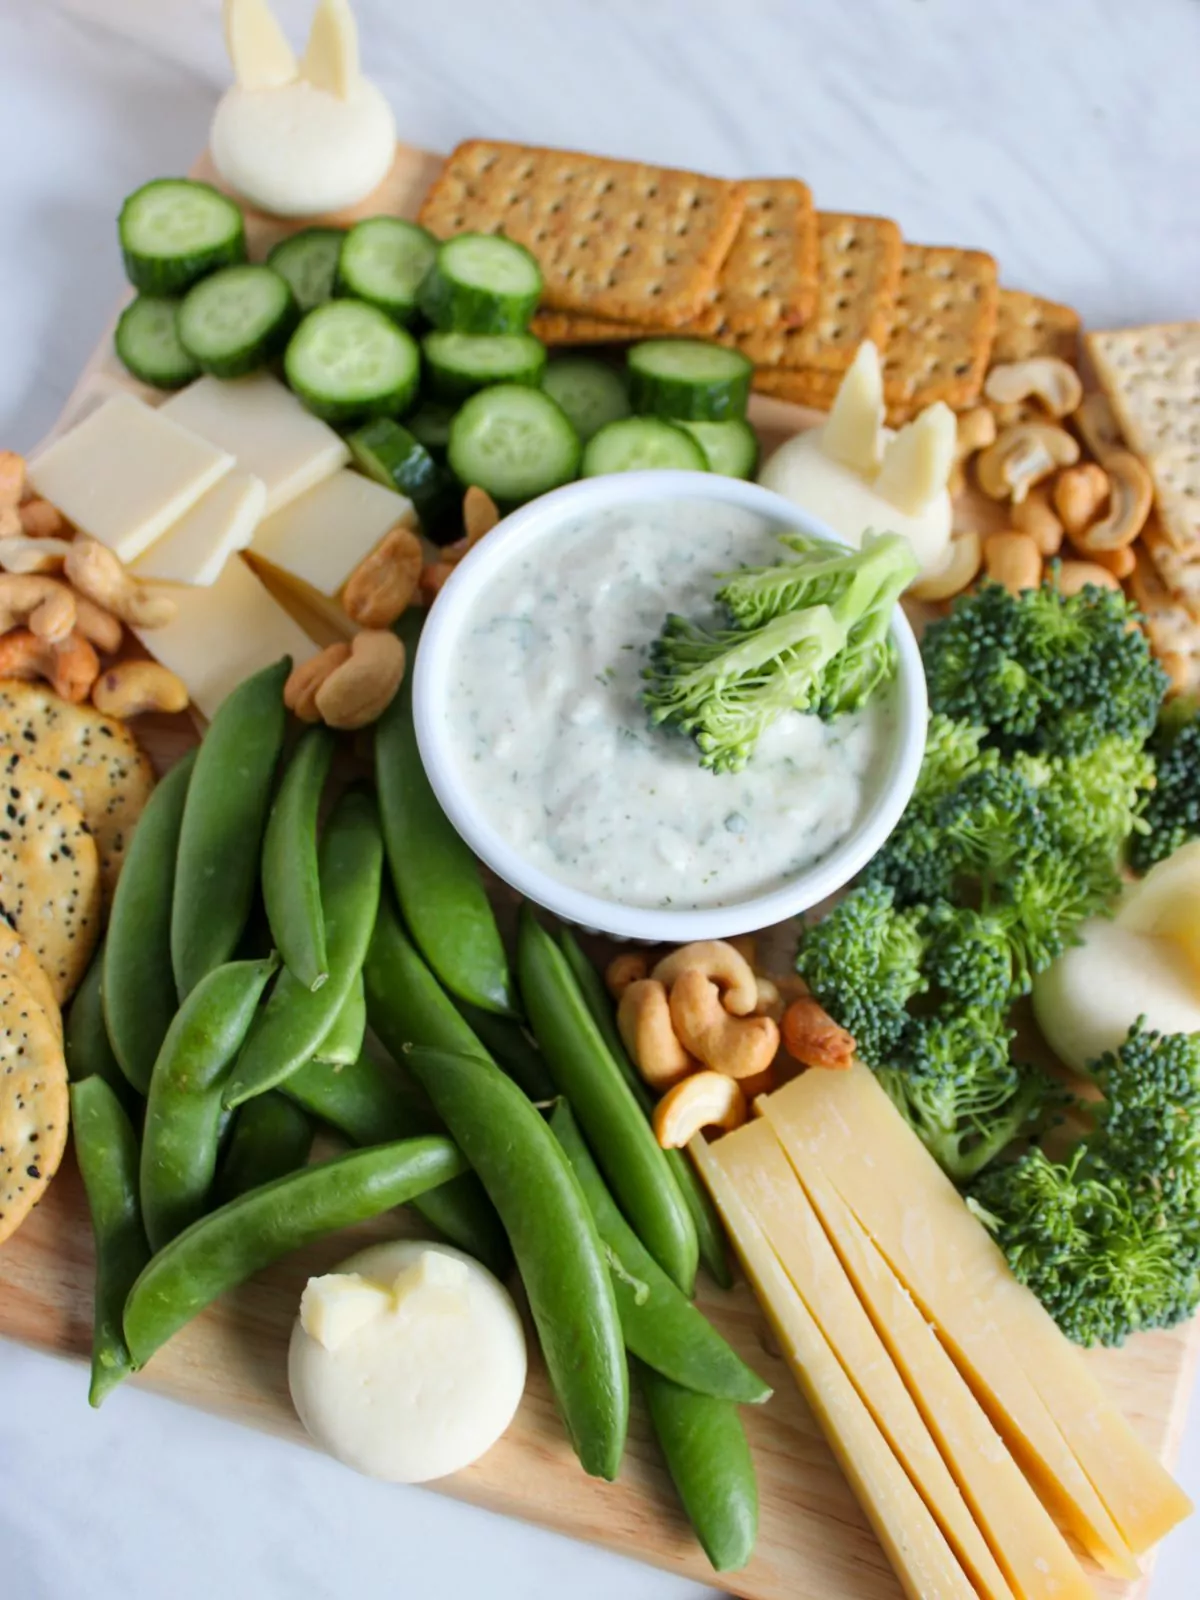 broccoli, sugar snap peas, cheese, nuts and more on board.